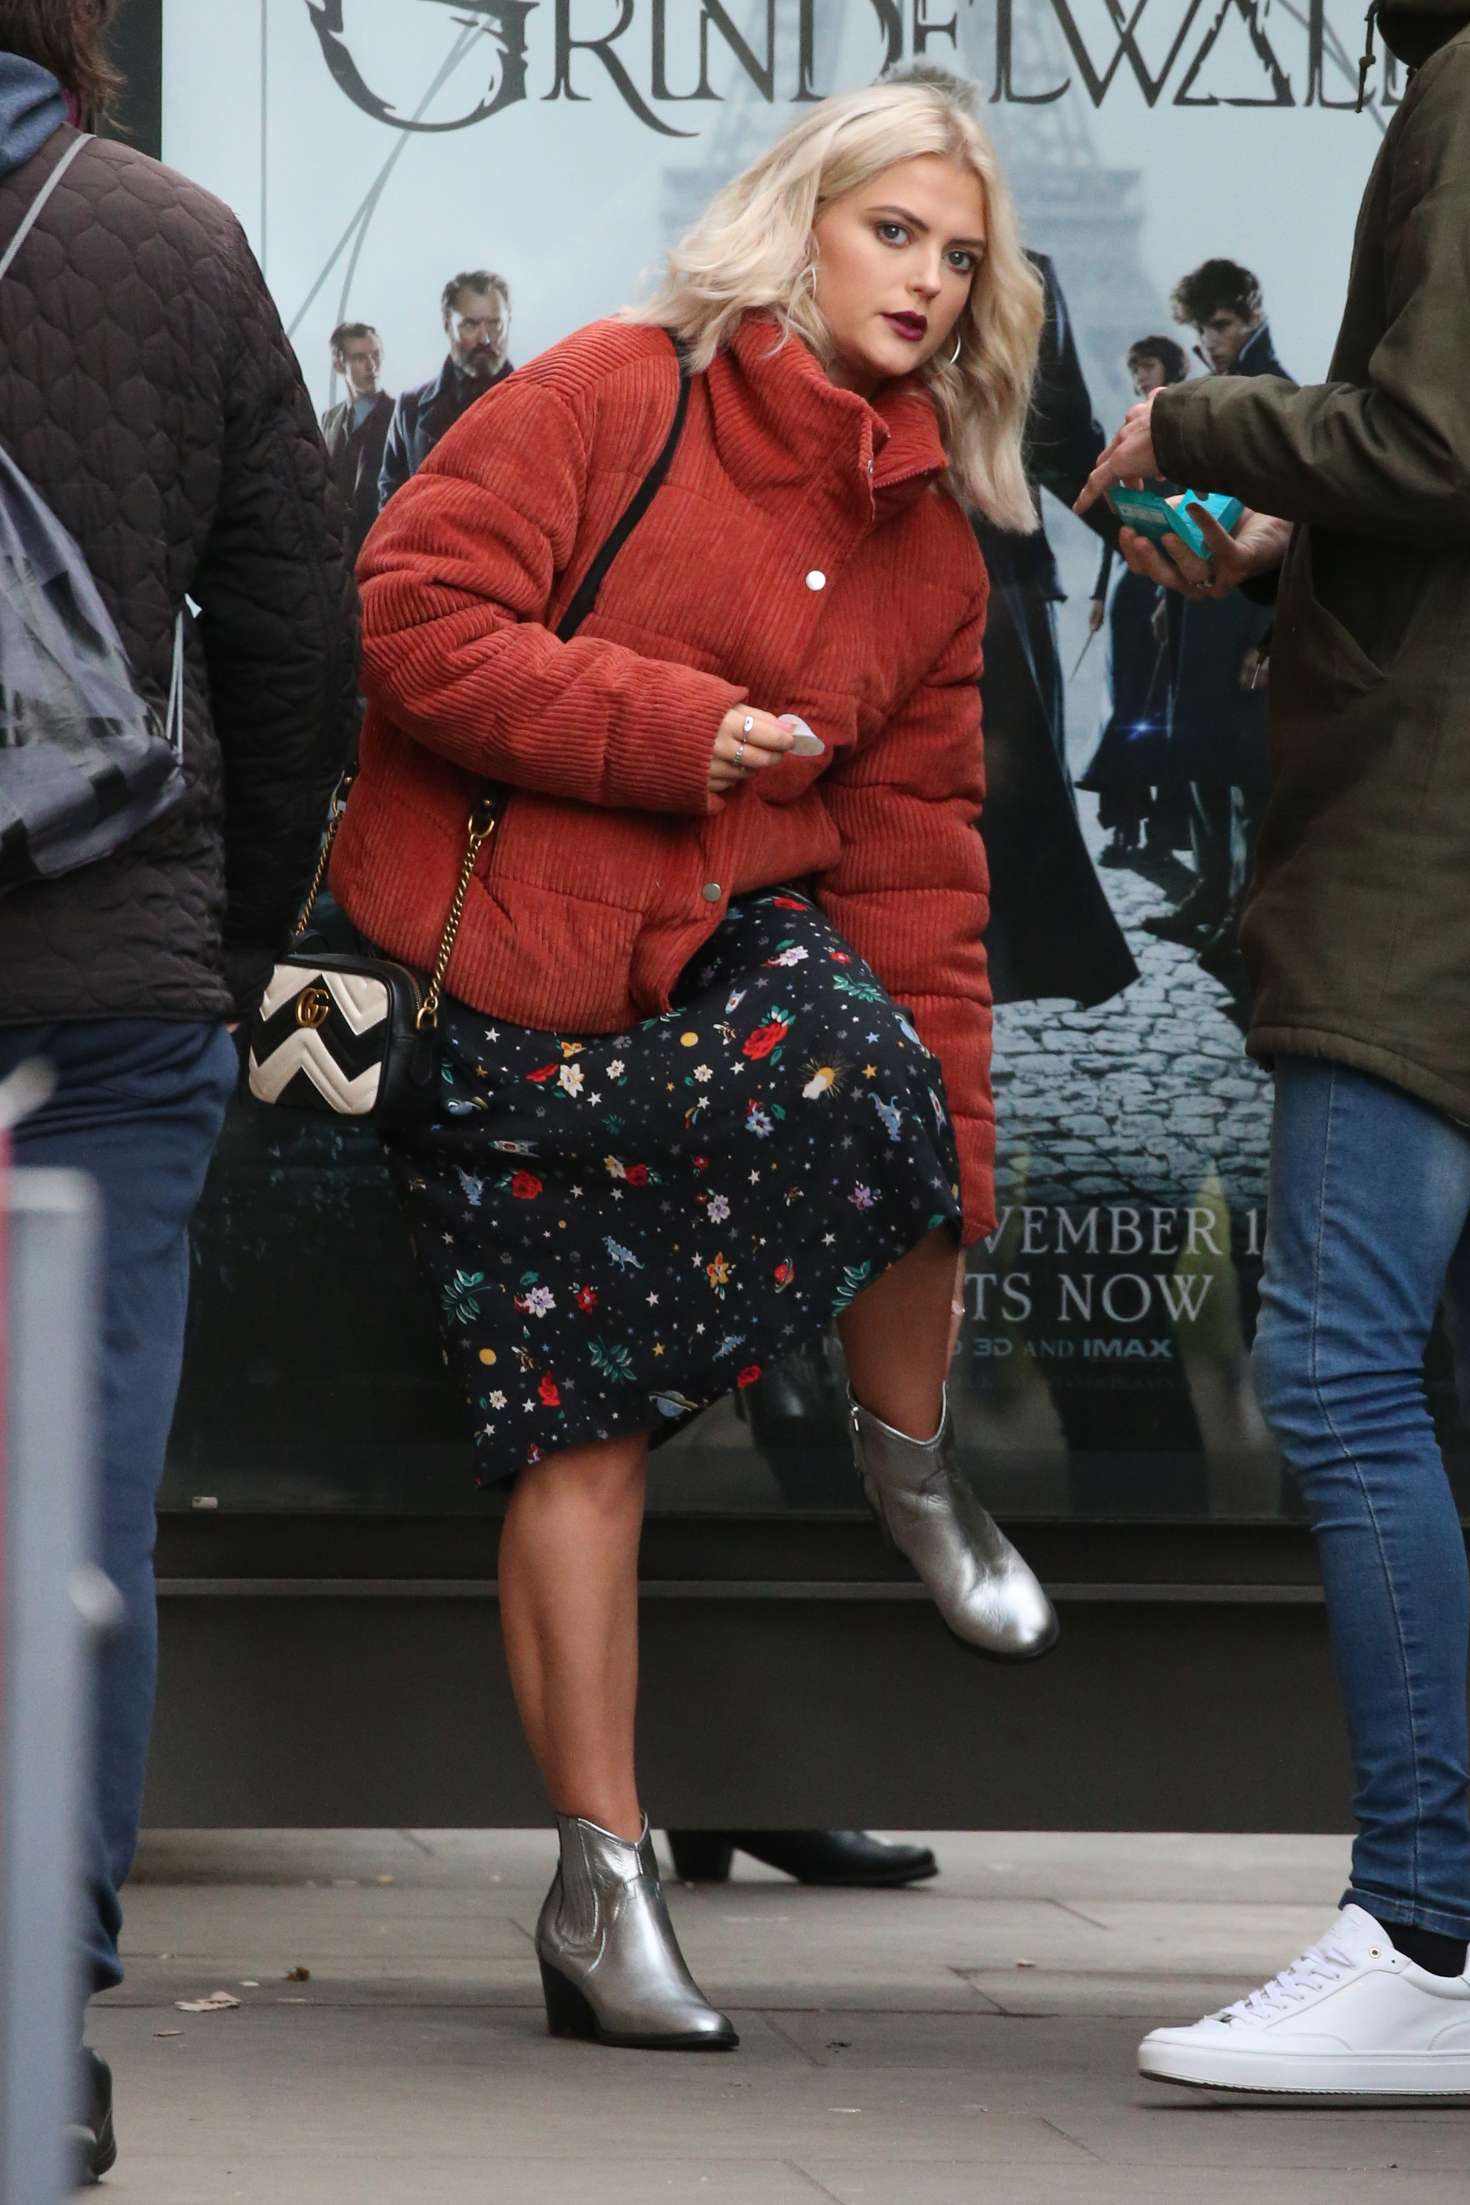 Lucy Fallon with boyfriend out in Manchester -10 | GotCeleb